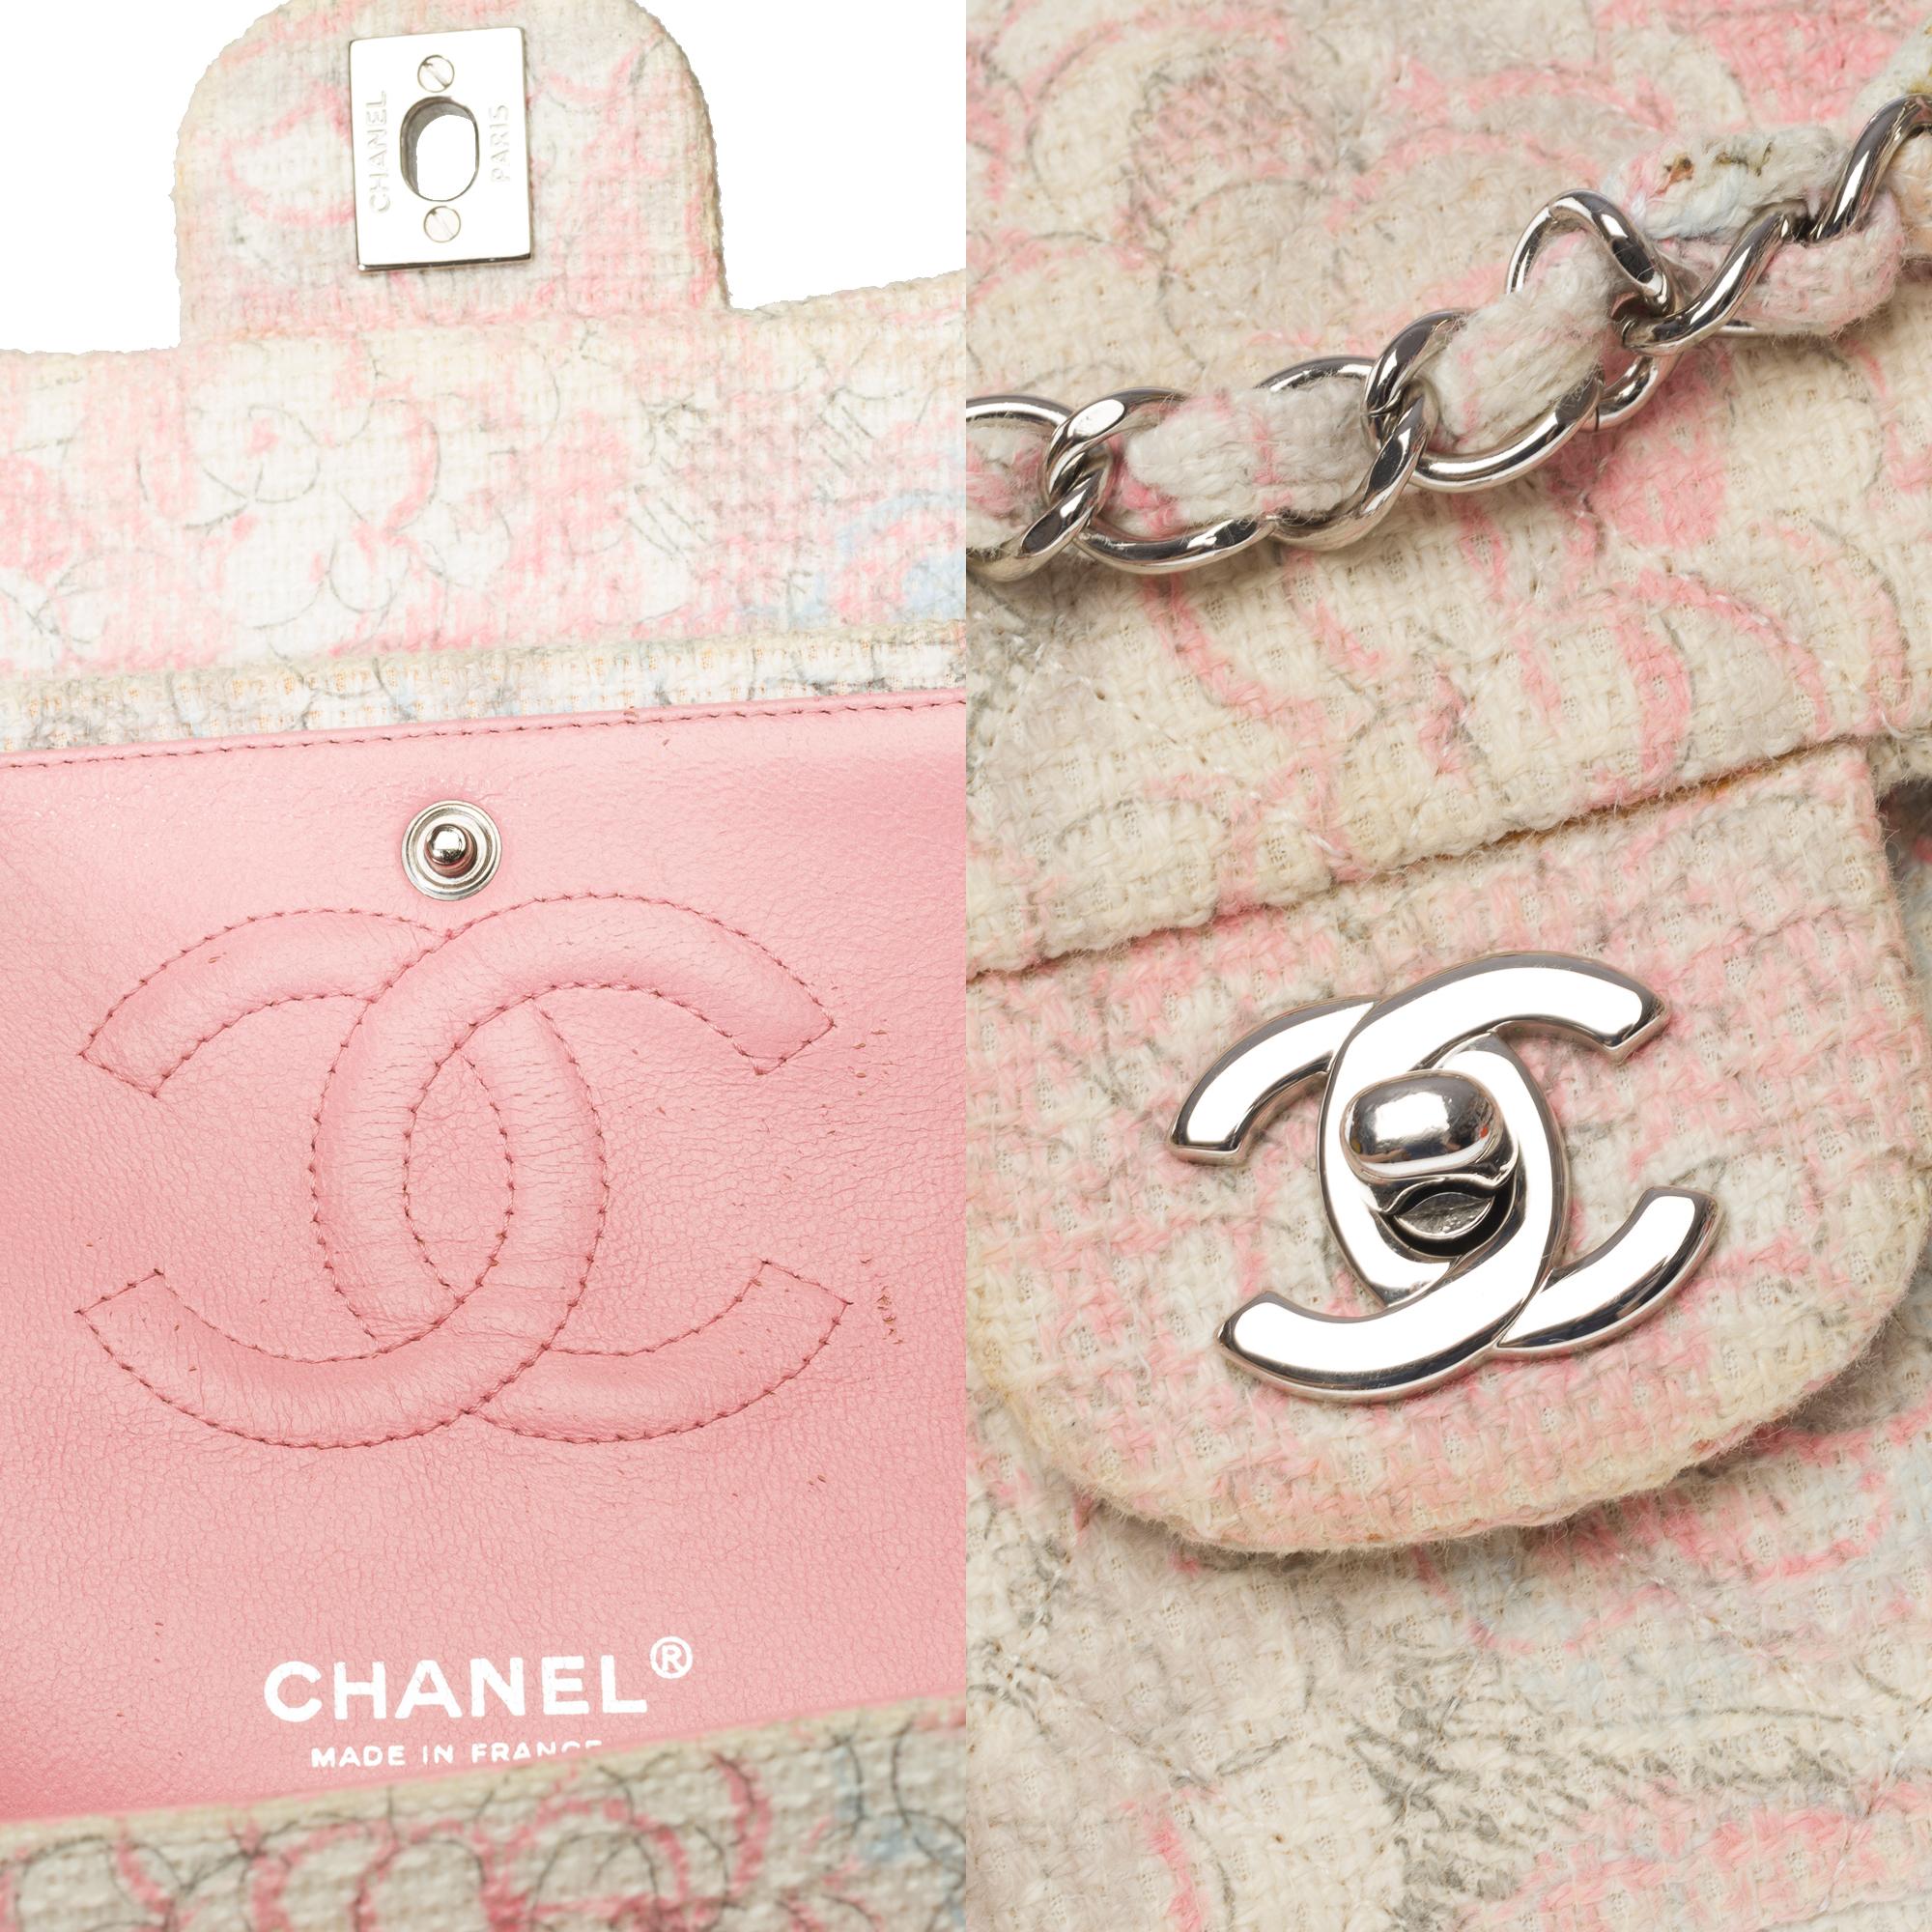 Rare Camelia Limited Edition Chanel Timeless Medium Shoulder bag in Tweed, SHW For Sale 2